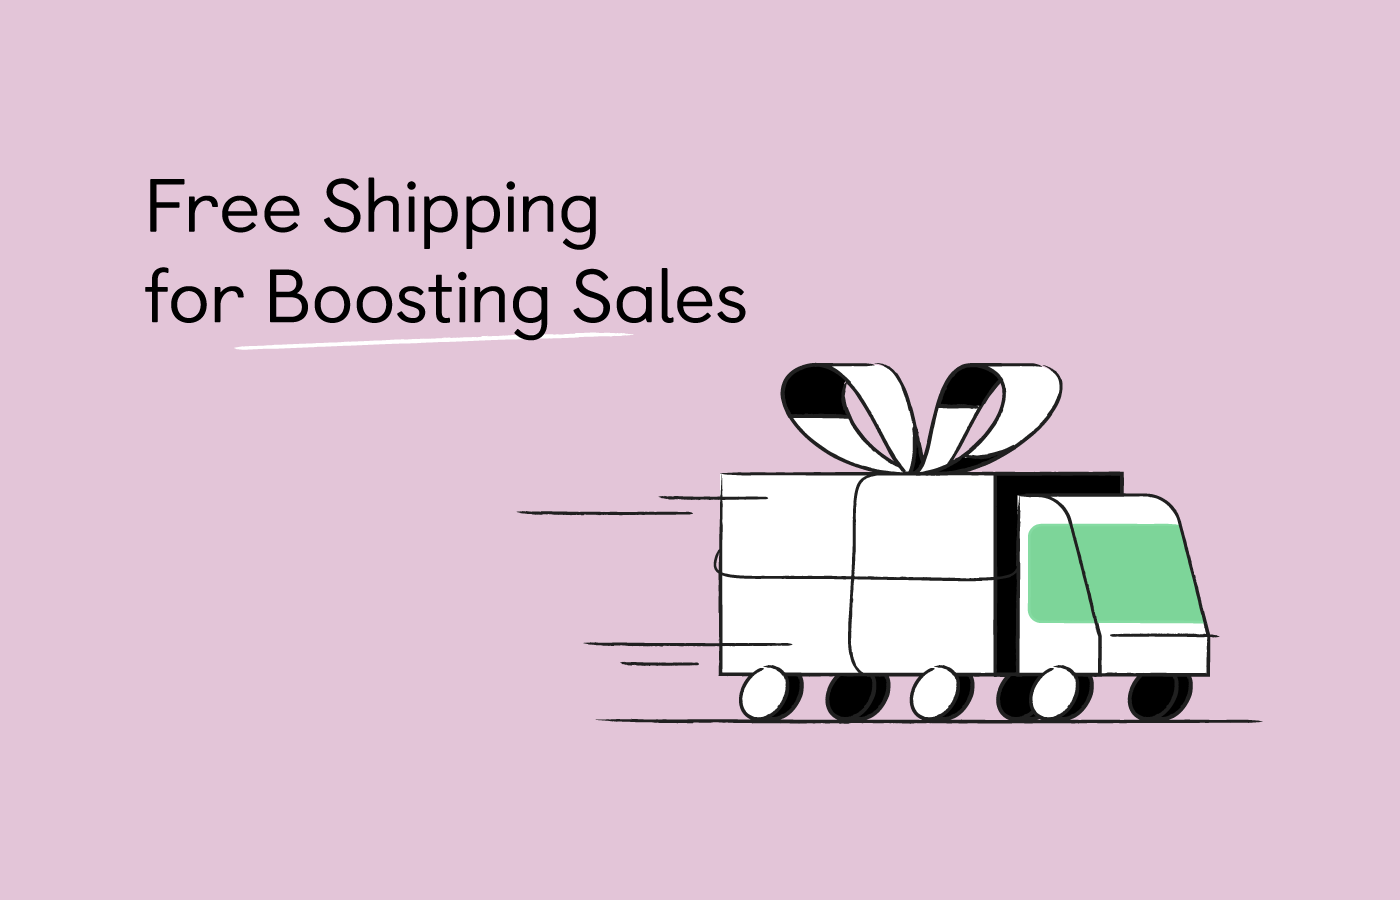 How to Use Free Shipping to Increase Shopify Sales